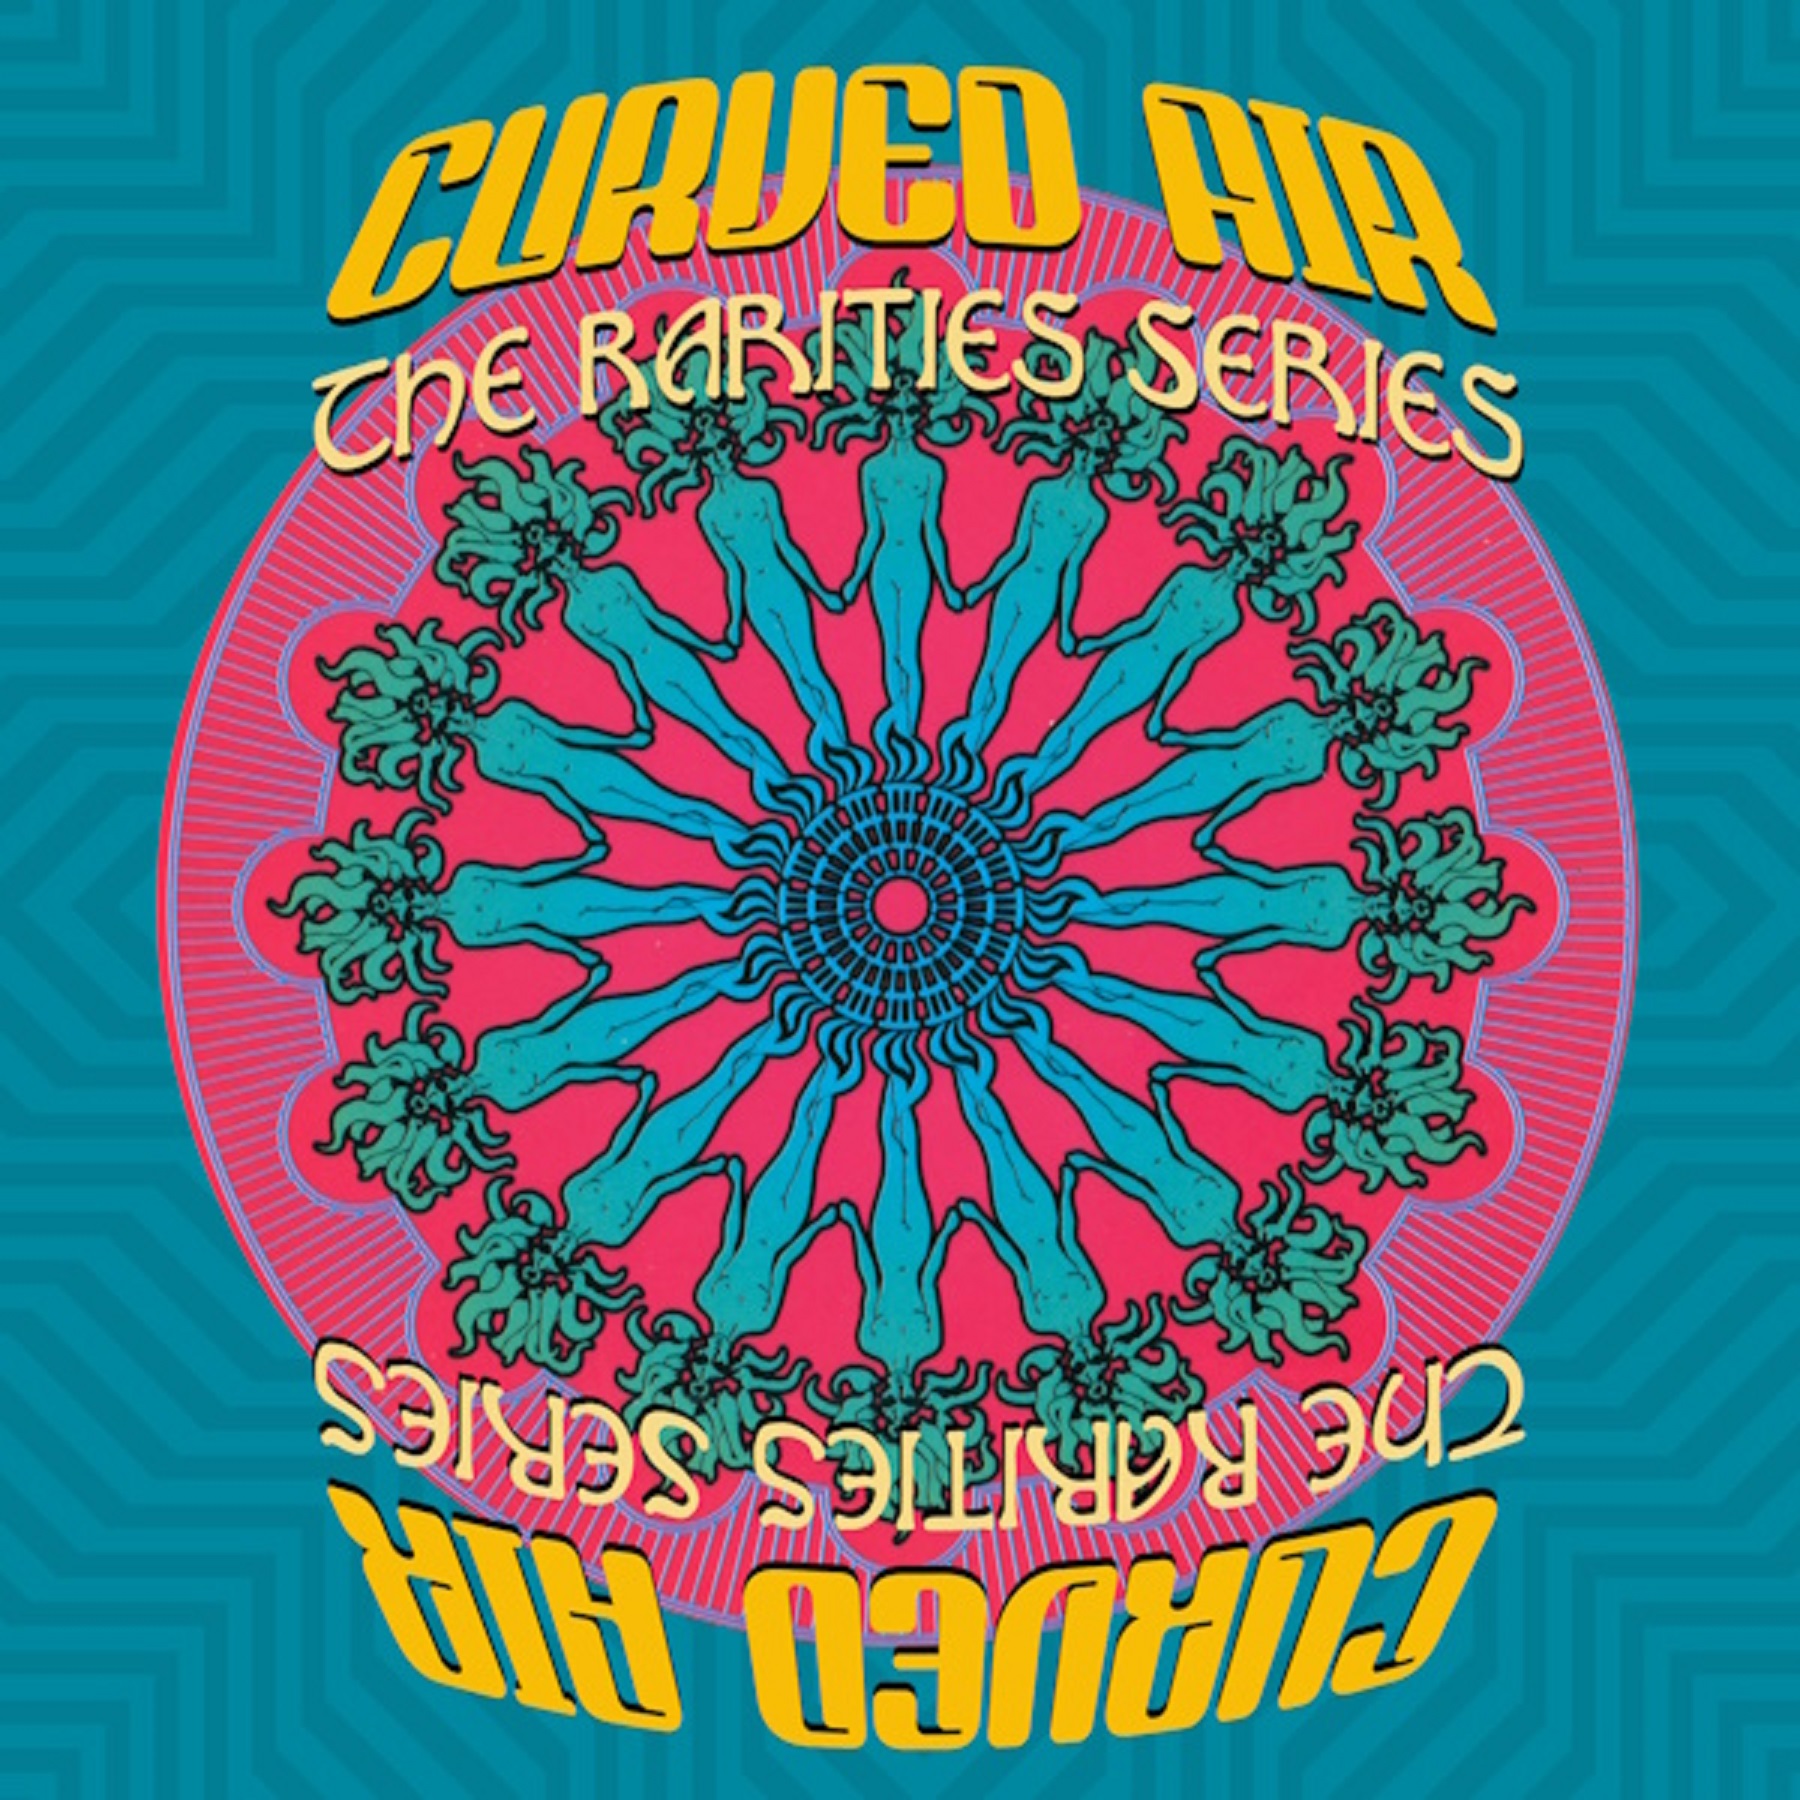 UK Prog Legends Curved Air “The Rarities Series Box Set” Available September 20, 2024